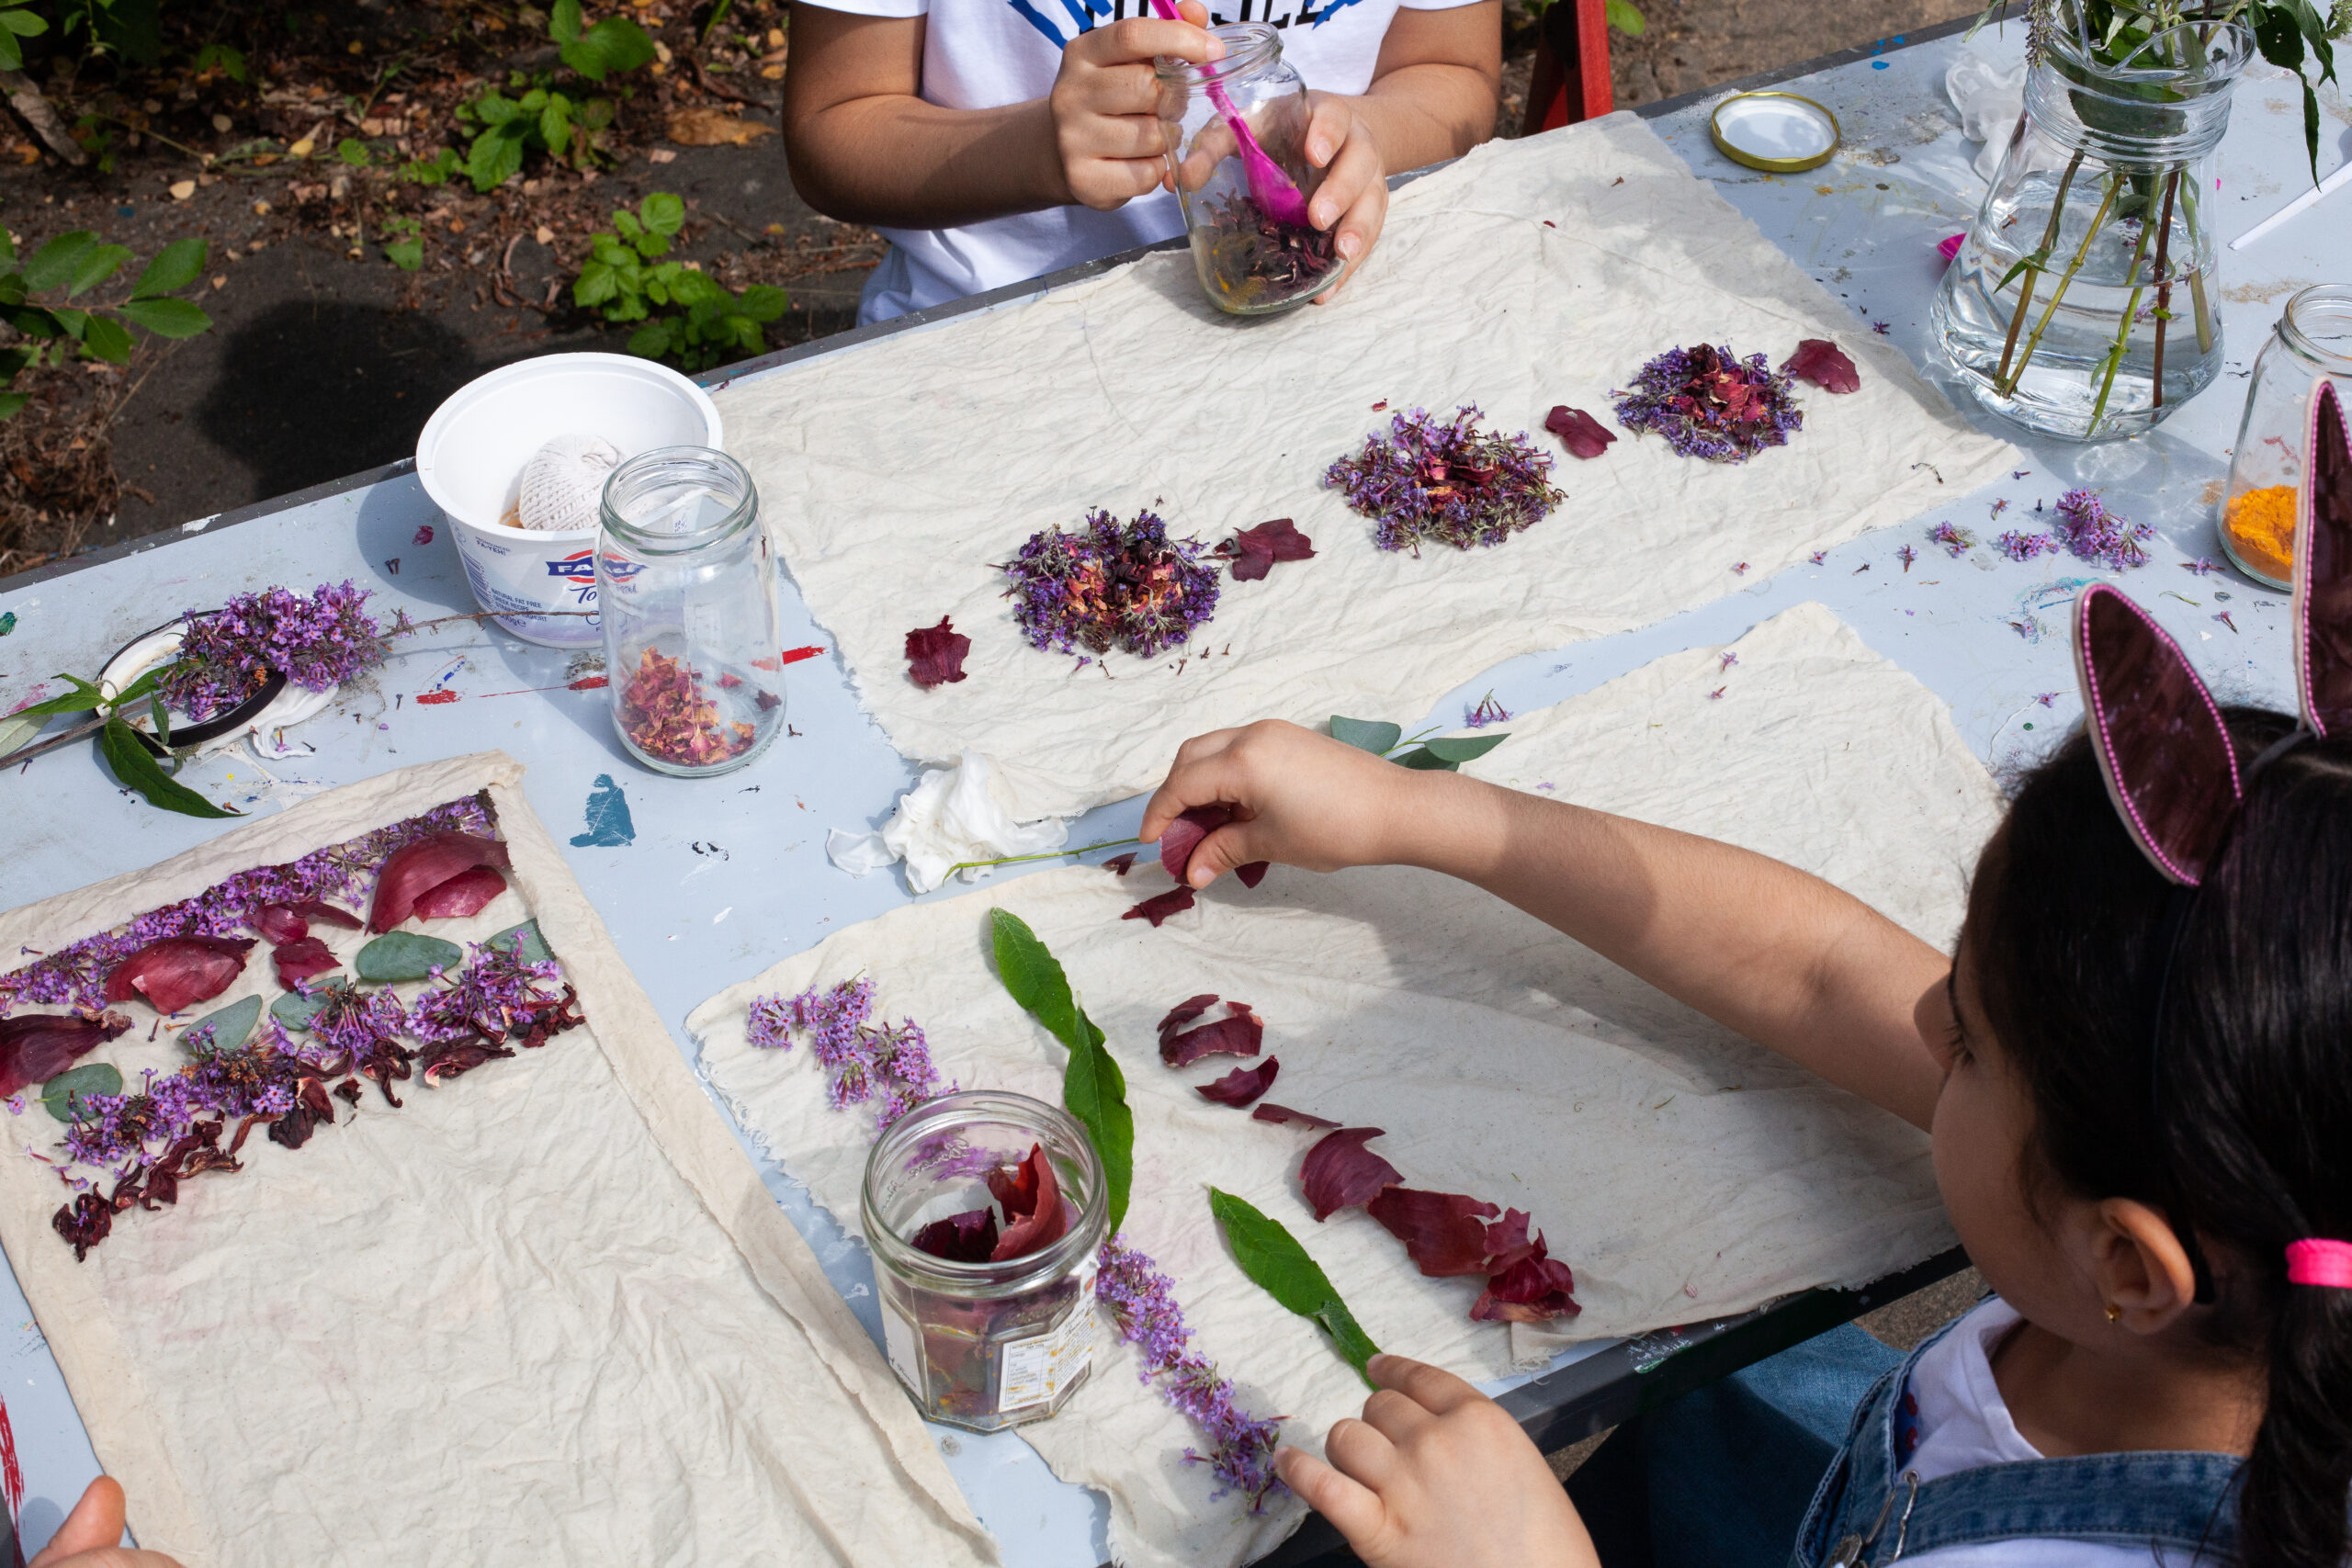 North Kensington: free creative workshops for families this summer holiday